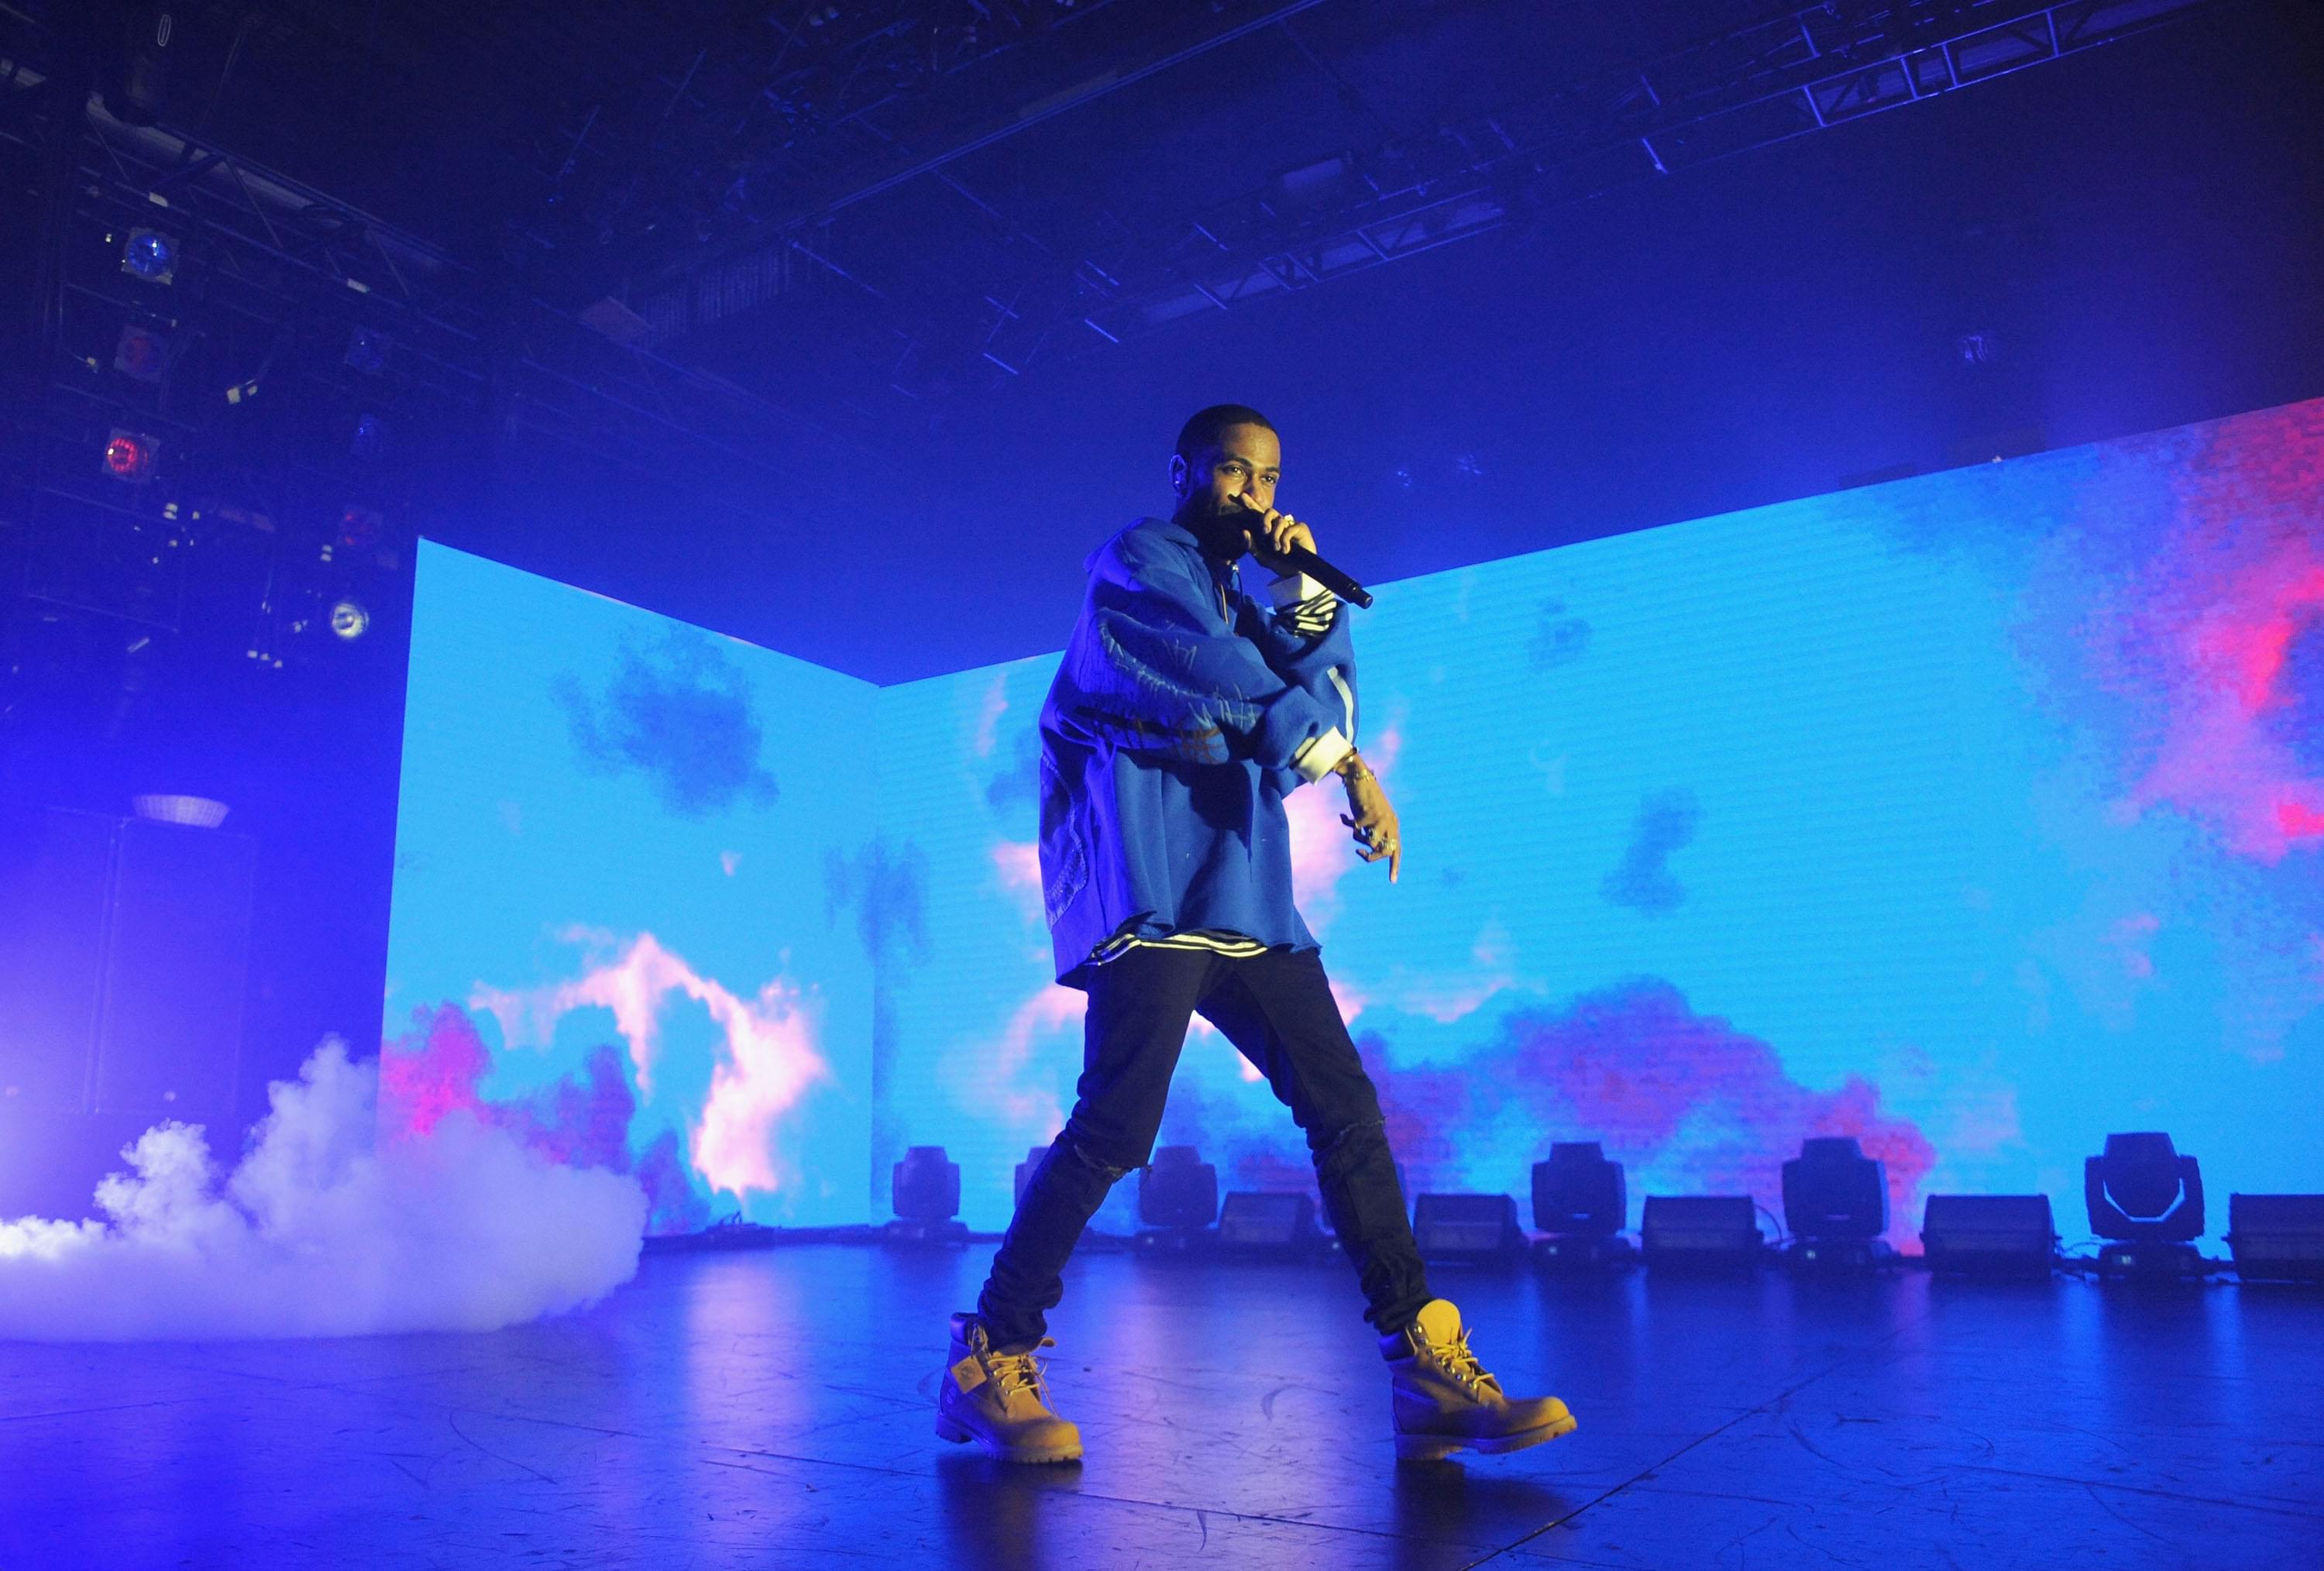 WATCH Big Sean Perform “Bounce Back” on ‘The Tonight Show’